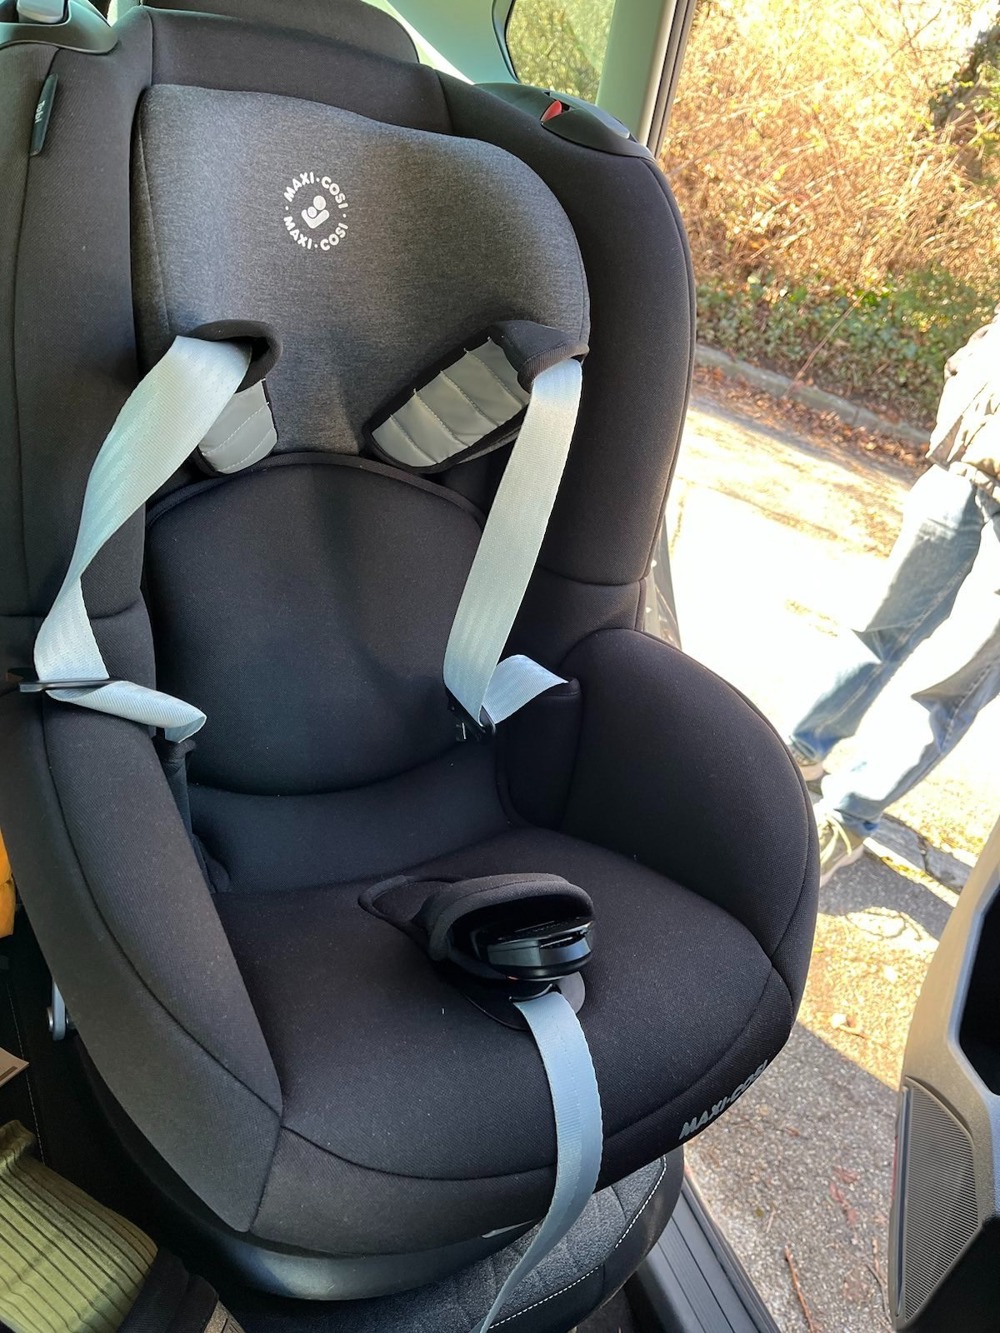 Super Easy to install Maxi-Cosi Tobi Padded Child Car Seat